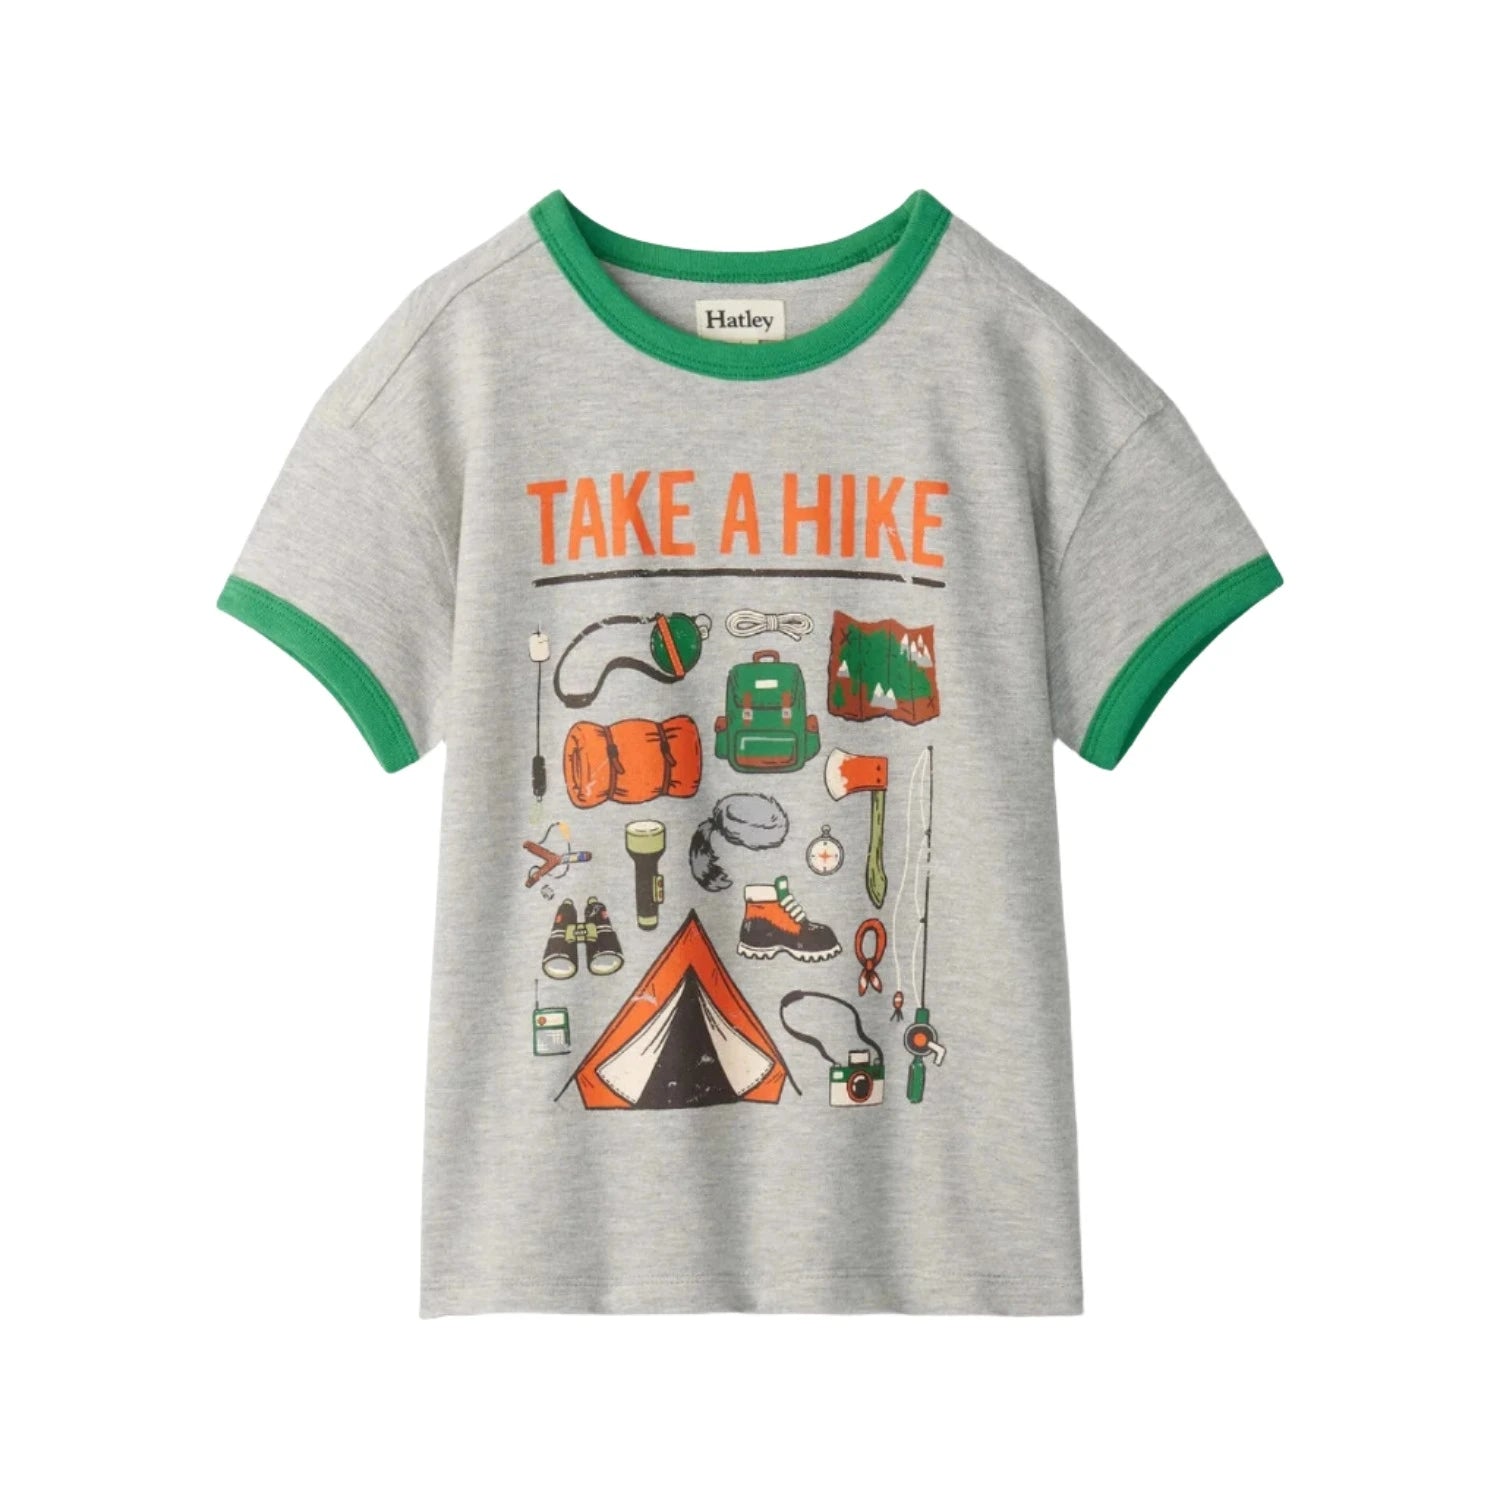 Hatley Kid's Take A Hike Graphic Tee front view flat